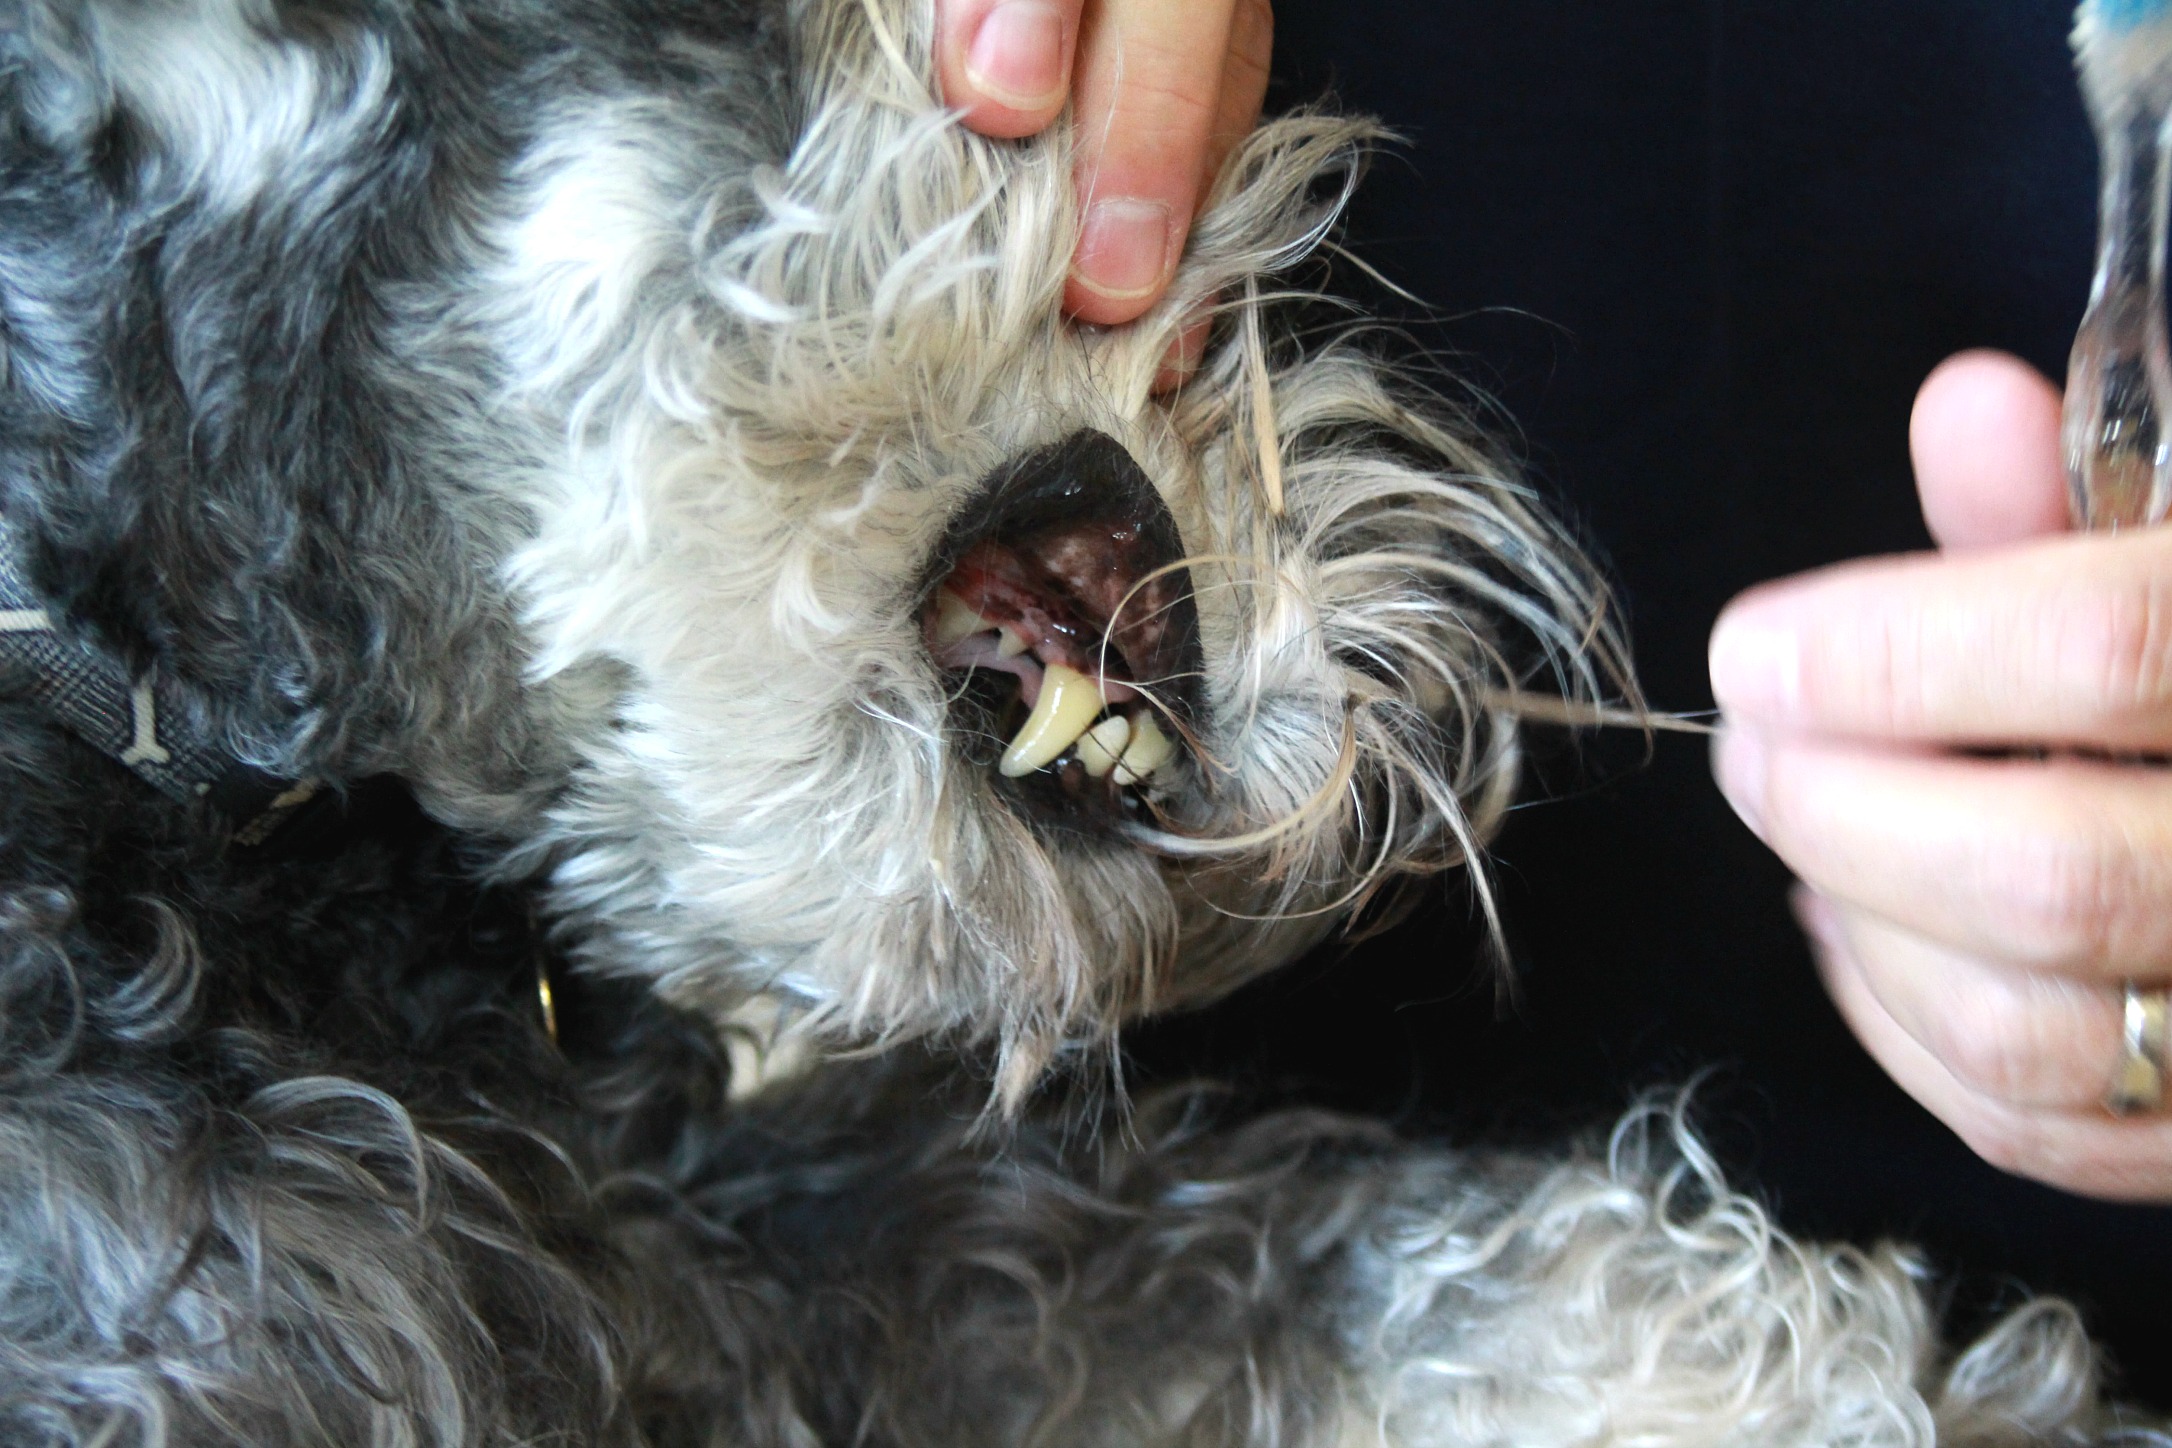 After two costly dental cleanings at the veterinarian, I learned to clean my dog's teeth. Much easier than I thought.